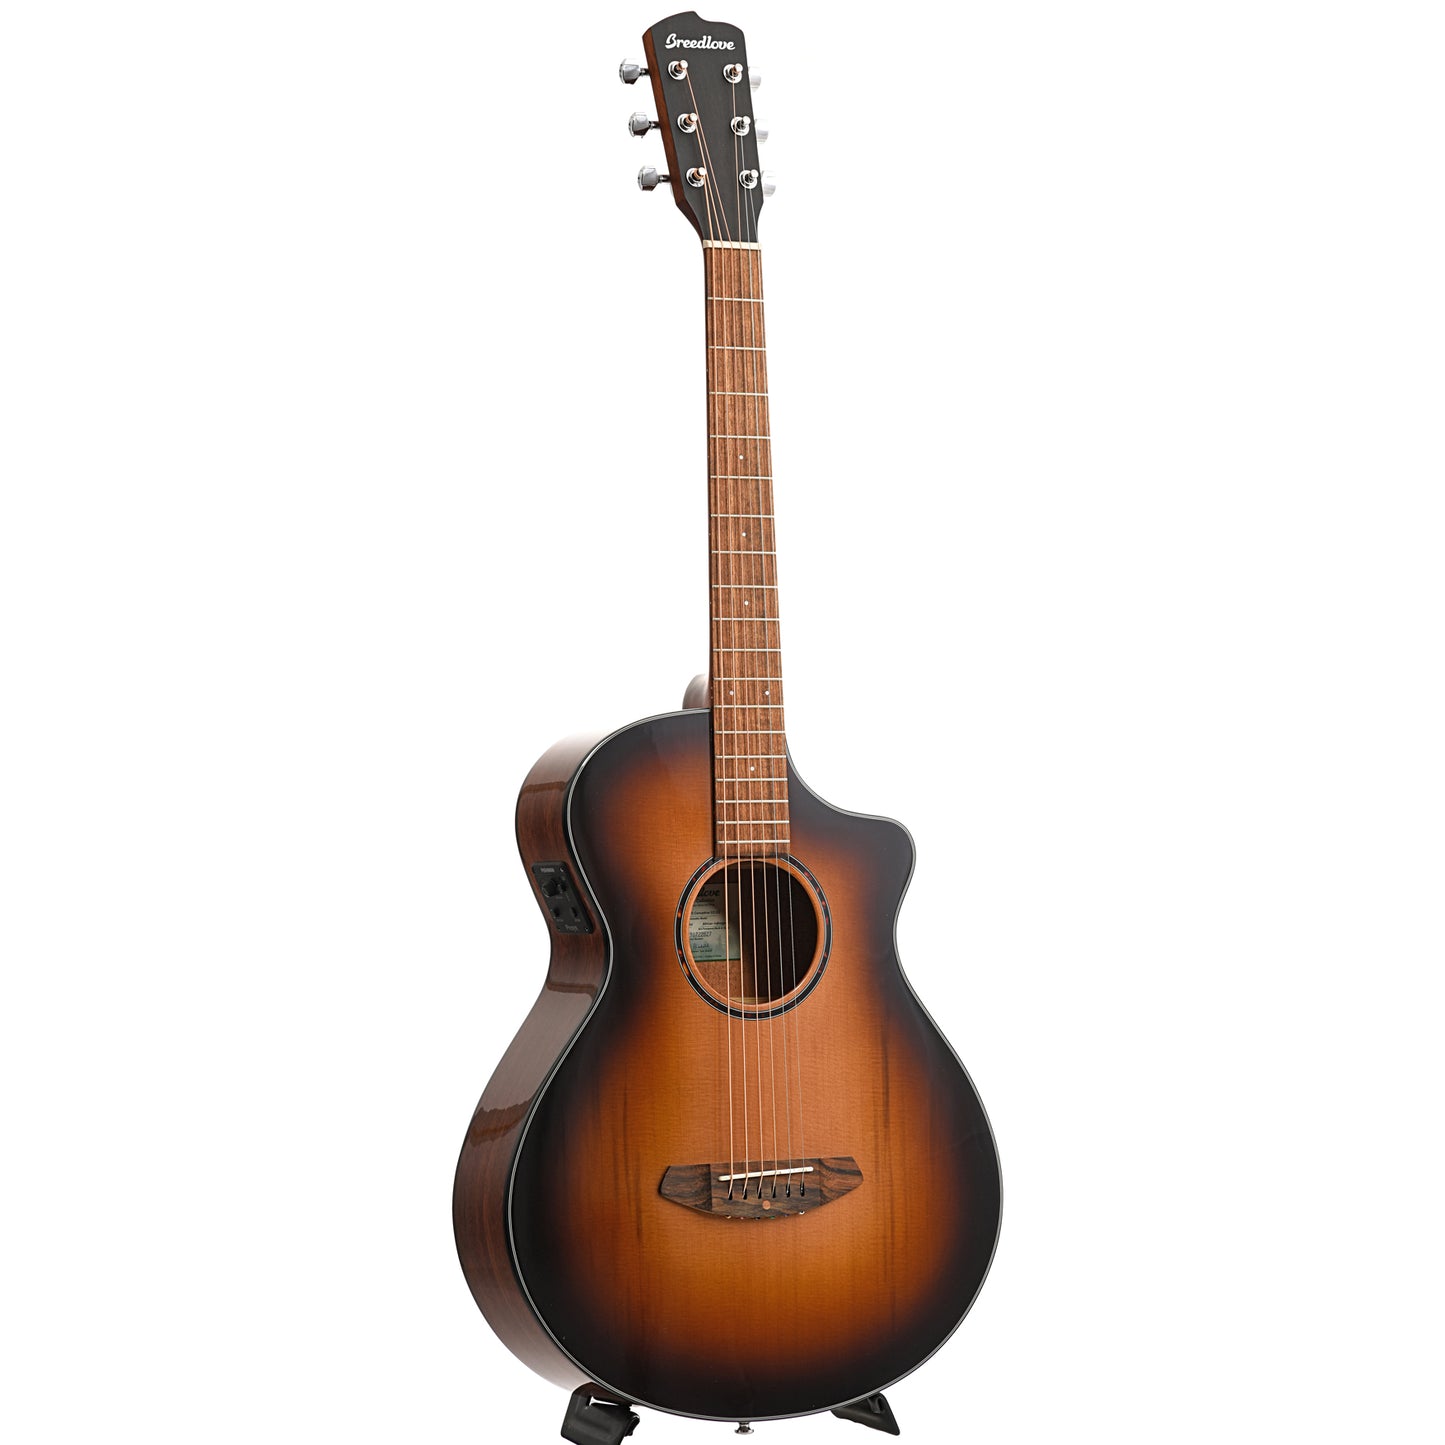 Image 11 of Breedlove Discovery S Concertina Edgeburst CE Red Cedar-African Mahogany Acoustic-Electric Guitar - SKU# DSCA44CERCAM : Product Type Flat-top Guitars : Elderly Instruments